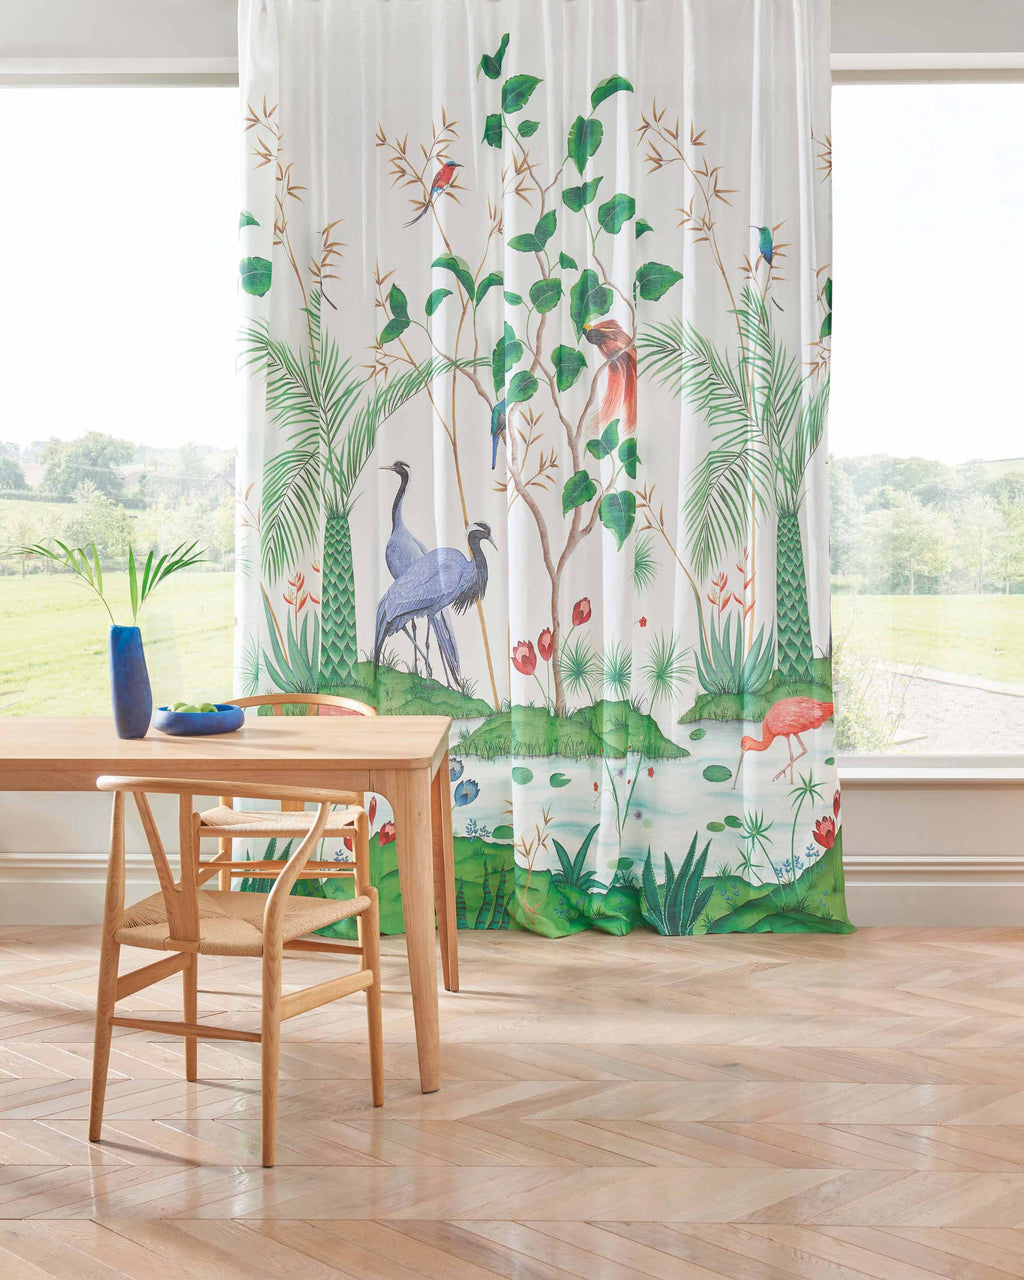 A stunning design created exclusively for Osborne & Little for their Empyrea range, featuring blue herons, palm trees and rambling botanicals. This image shows the fabric hanging as curtains